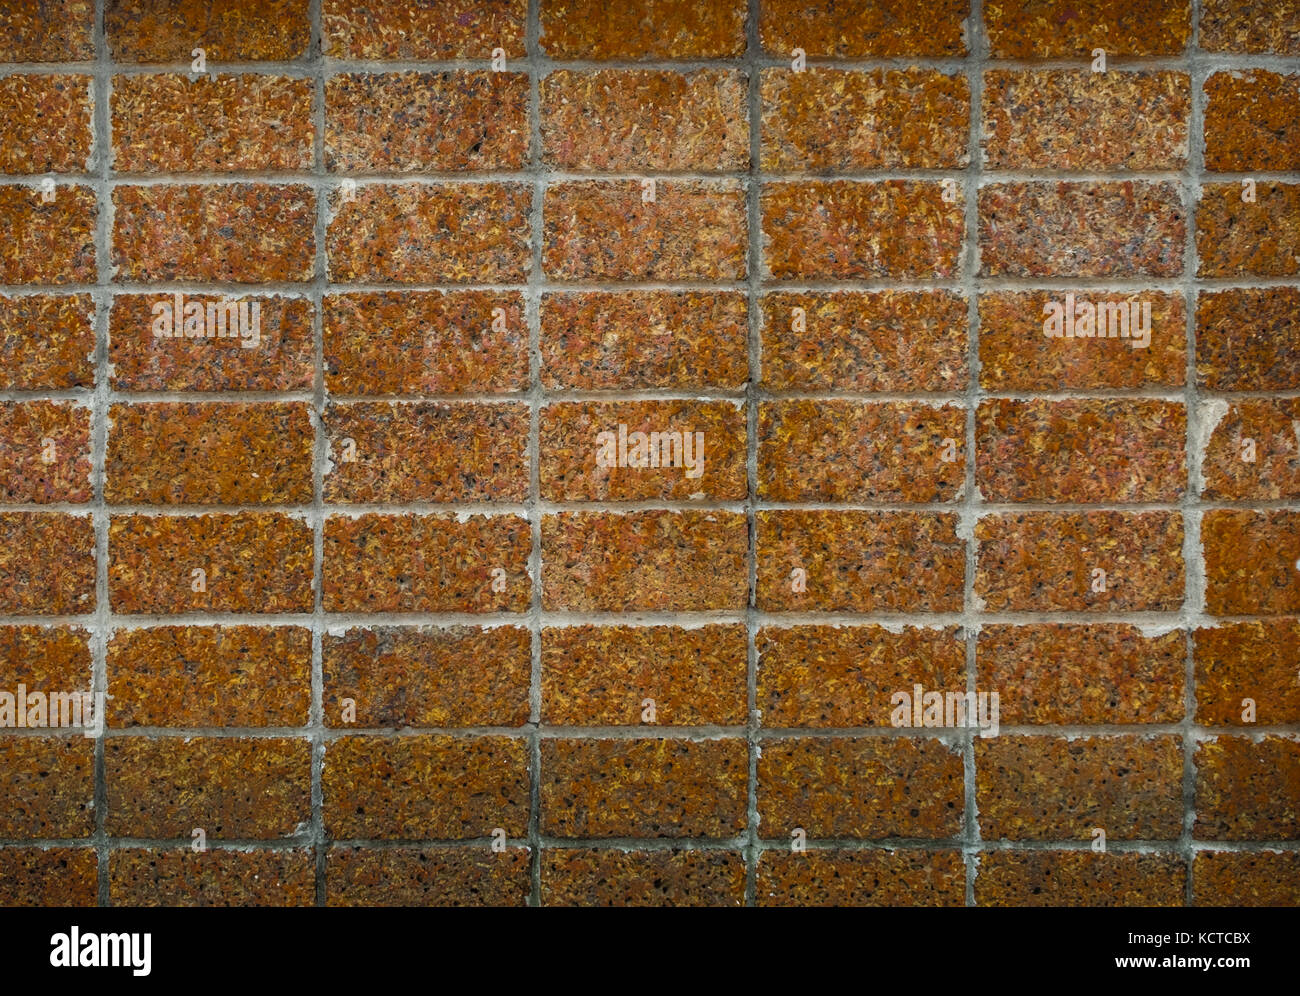 Front view of old grunge laterite wall texture. Stock Photo